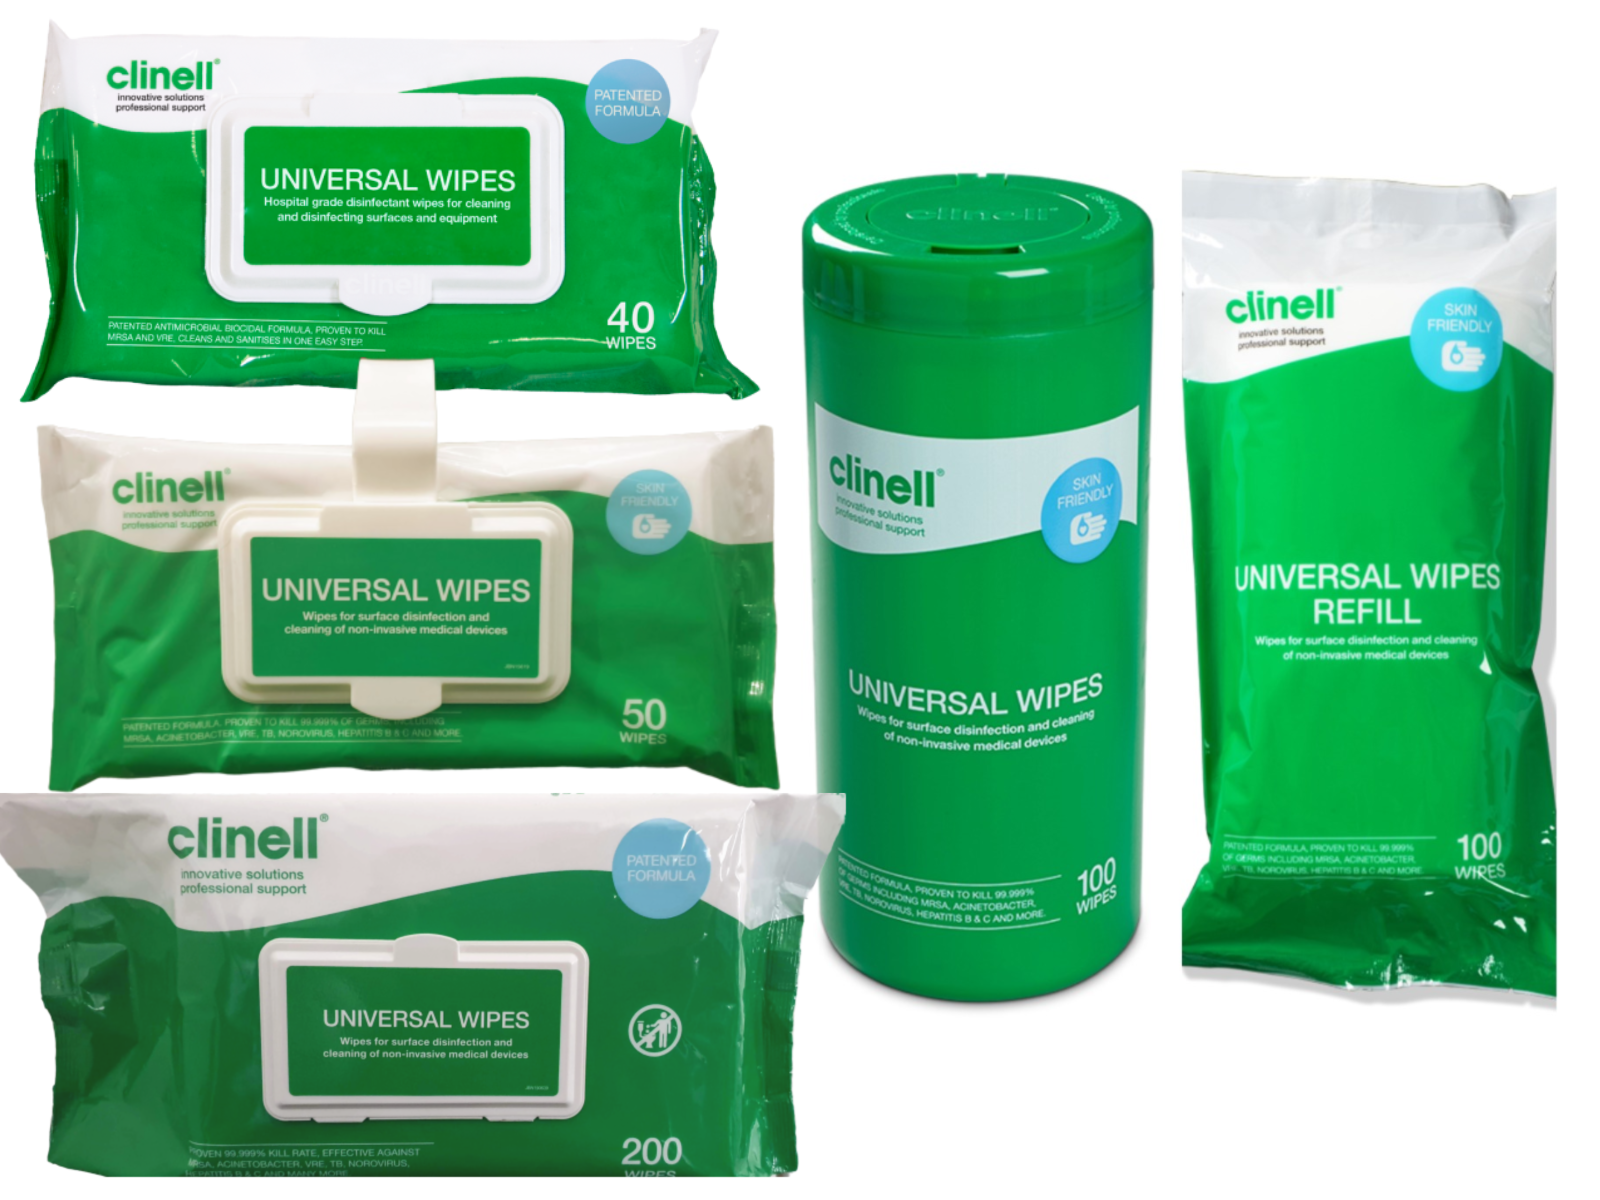 Clinell Wipes Options